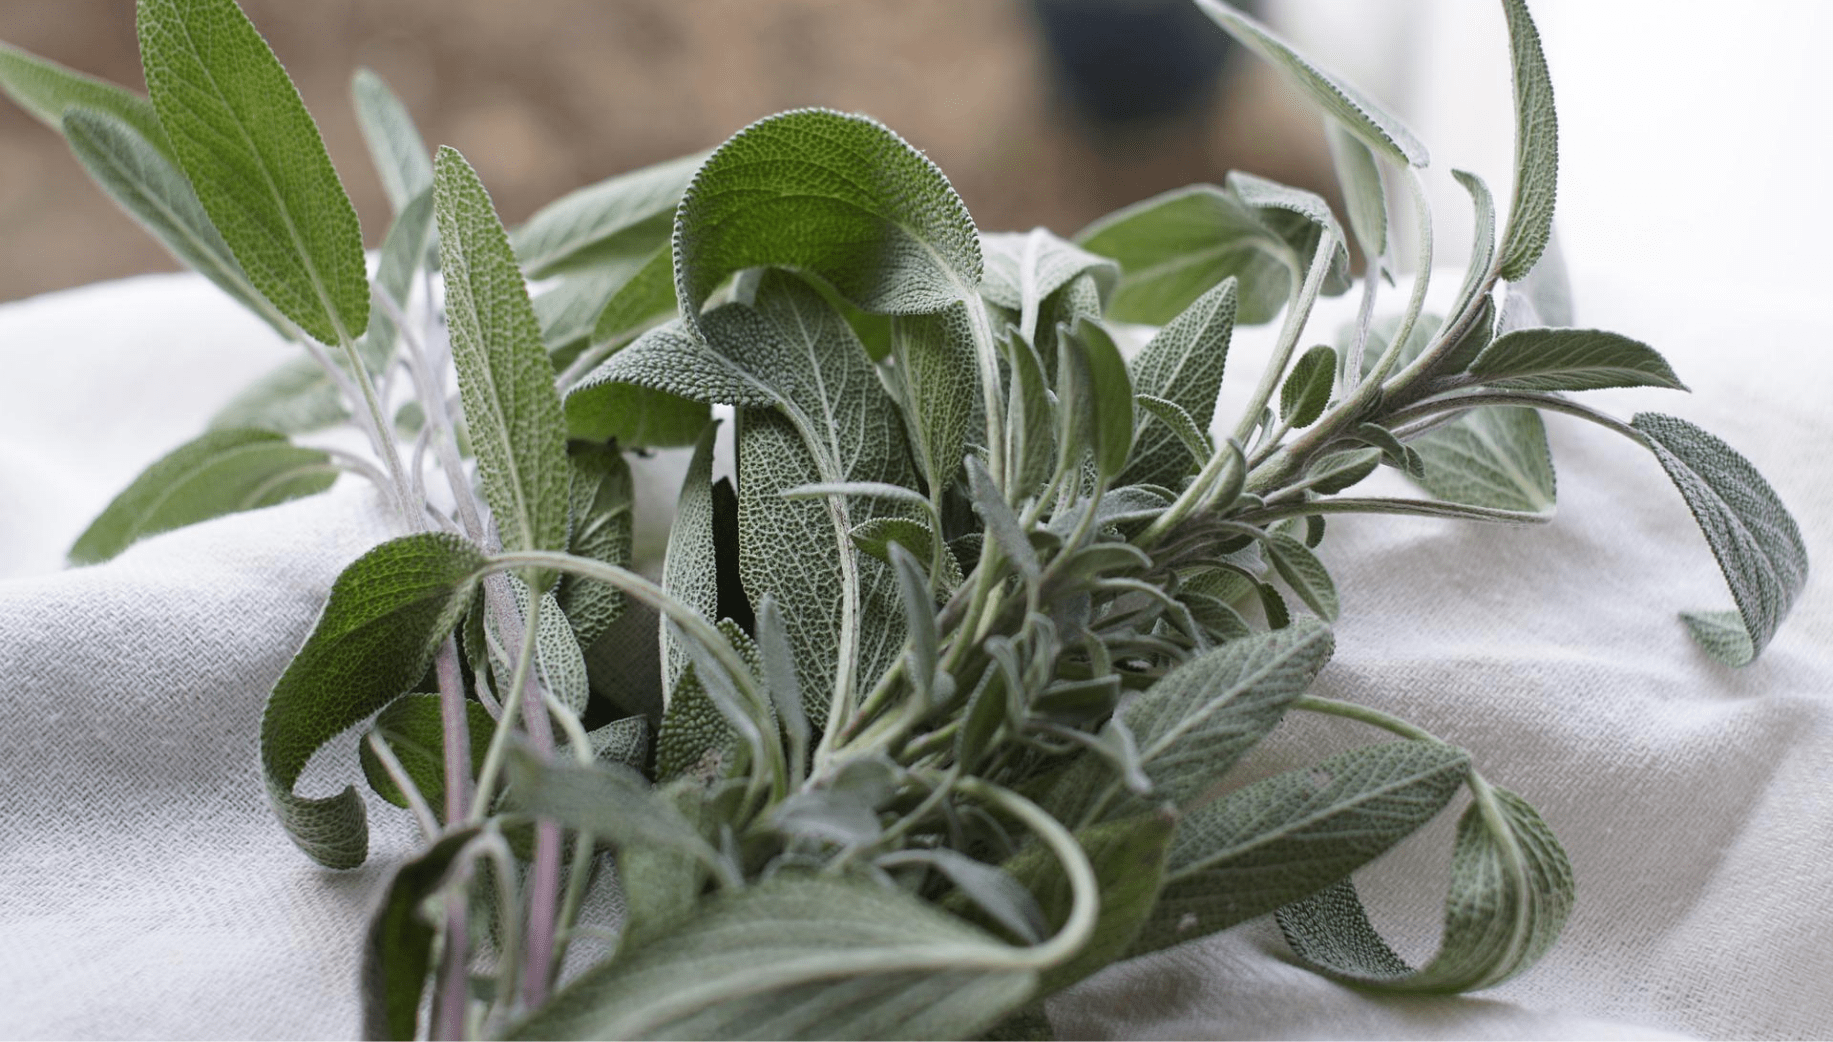 Sage plants commonly found in Meghalaya